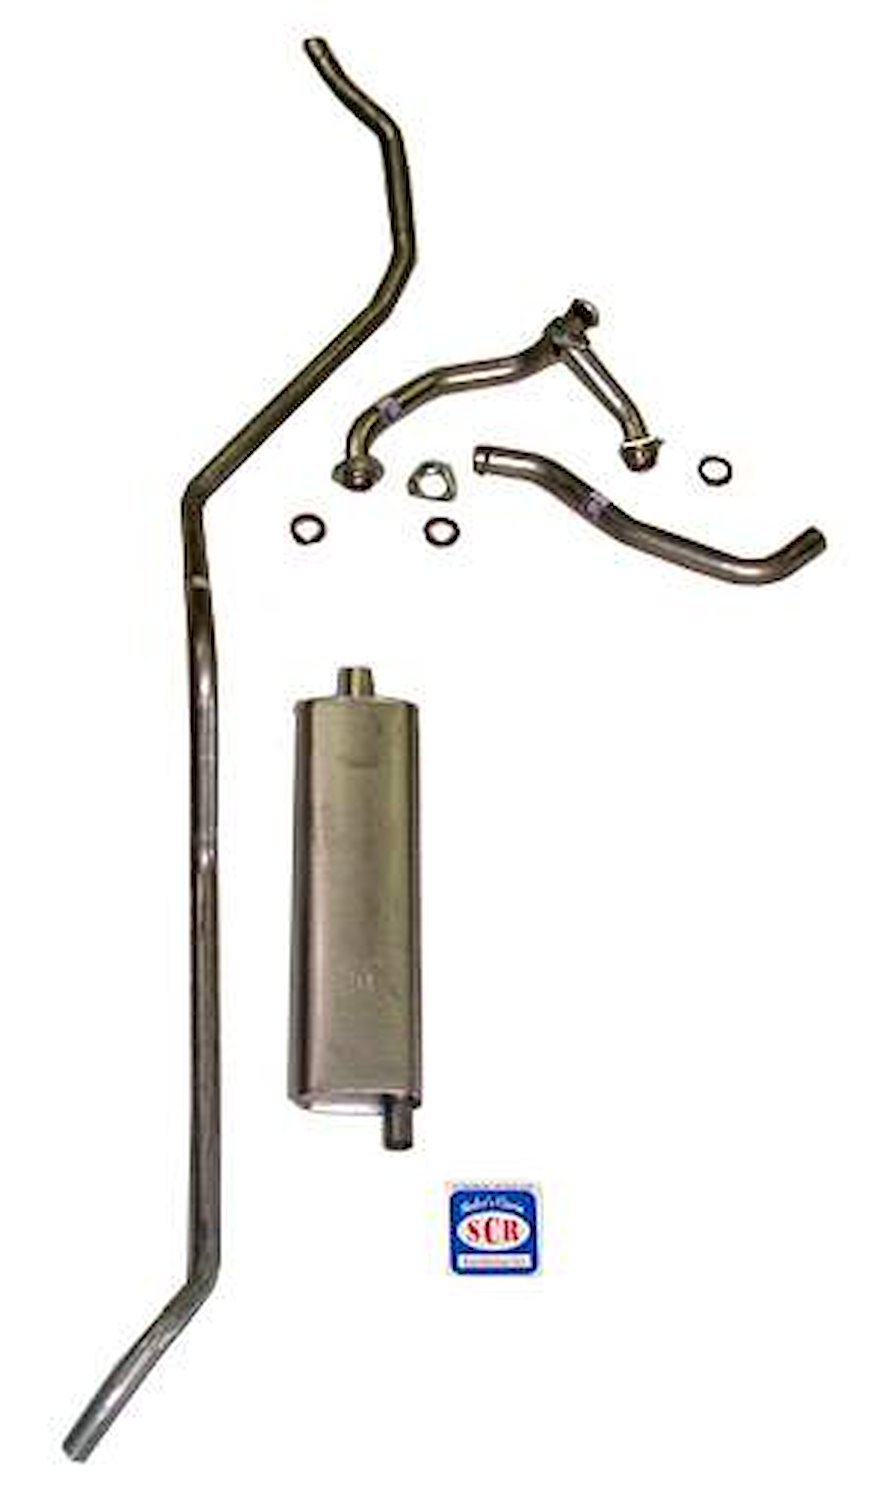 73042 1958 Chevrolet Full-Size Exhaust System 8-cyl 283 Single